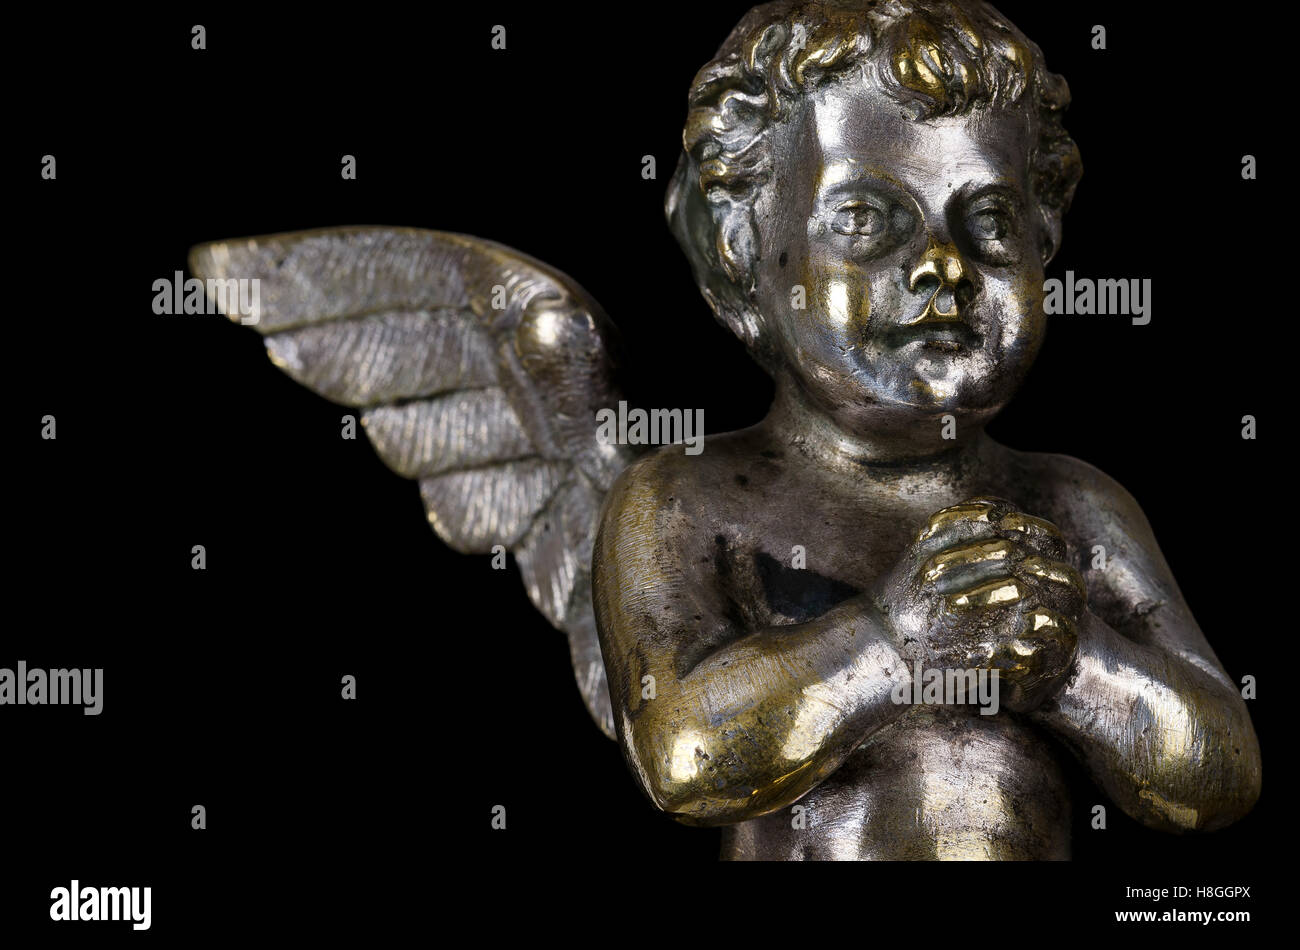 Praying winged putto side view on black background. Angel made of brass, covered with silver, part of a candelabra. Stock Photo